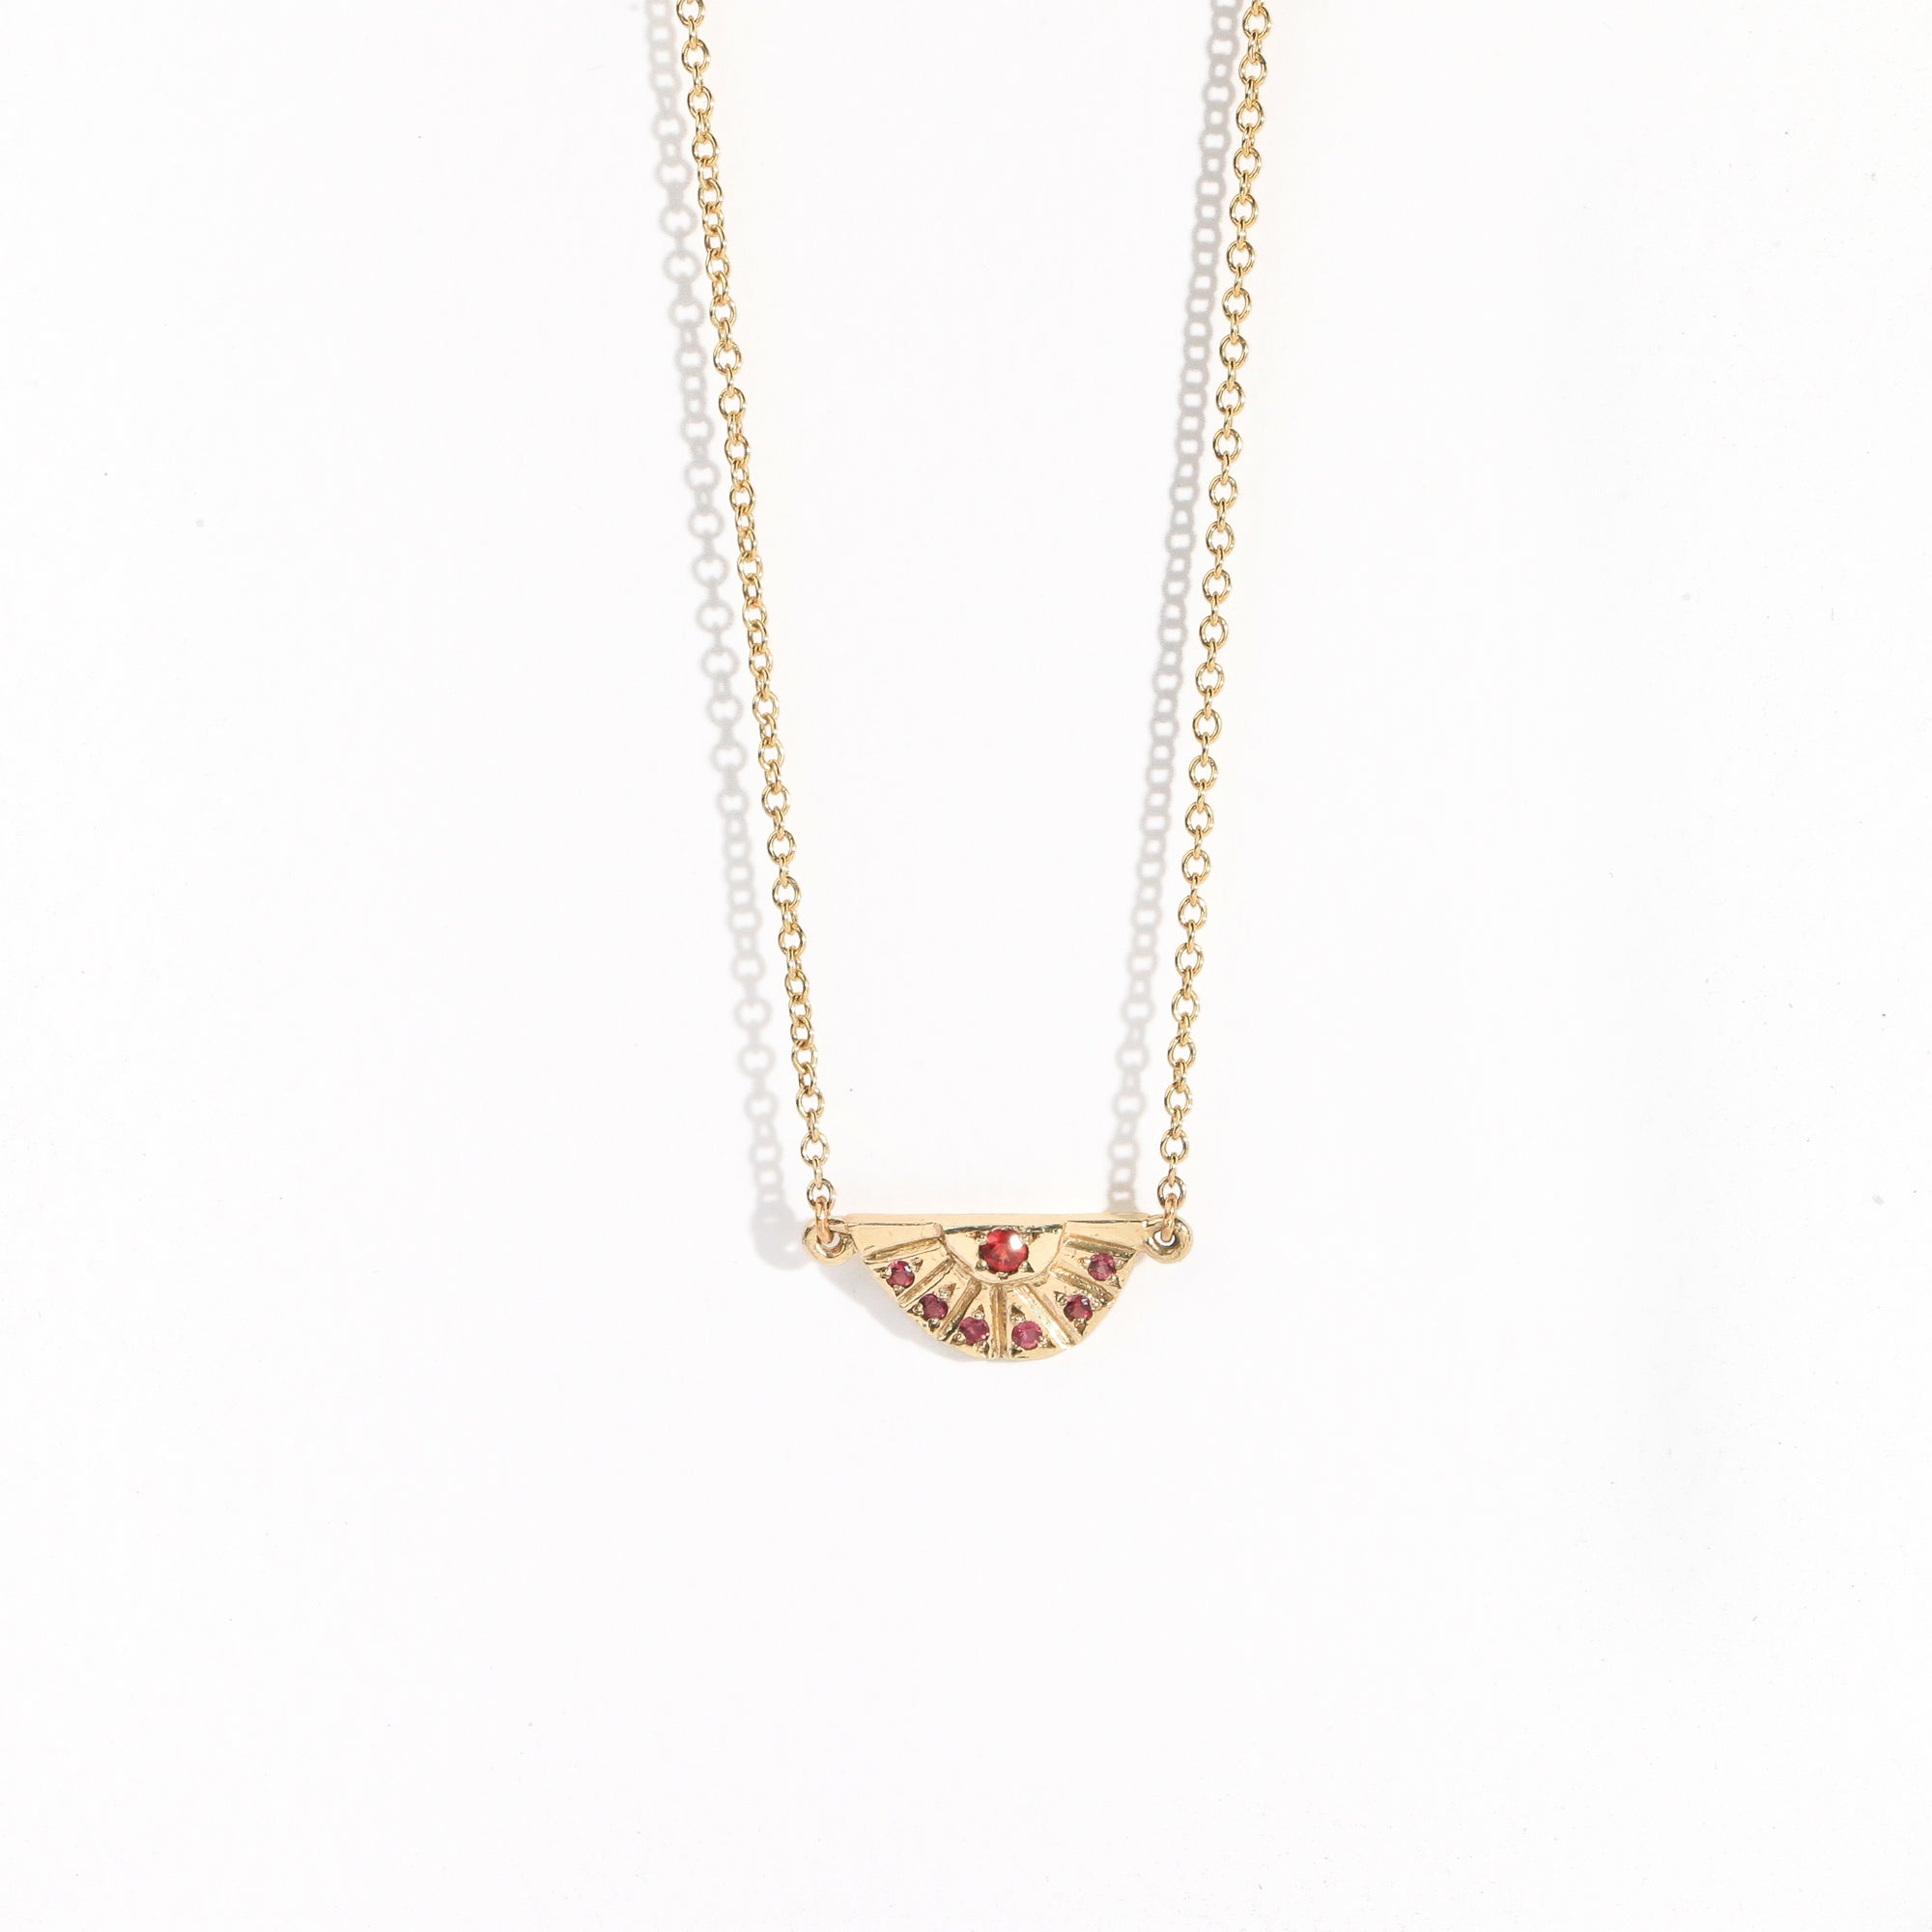 9ct yellow gold pendant rising sun detailed with red and pink sapphires by Black Finch Jewellery